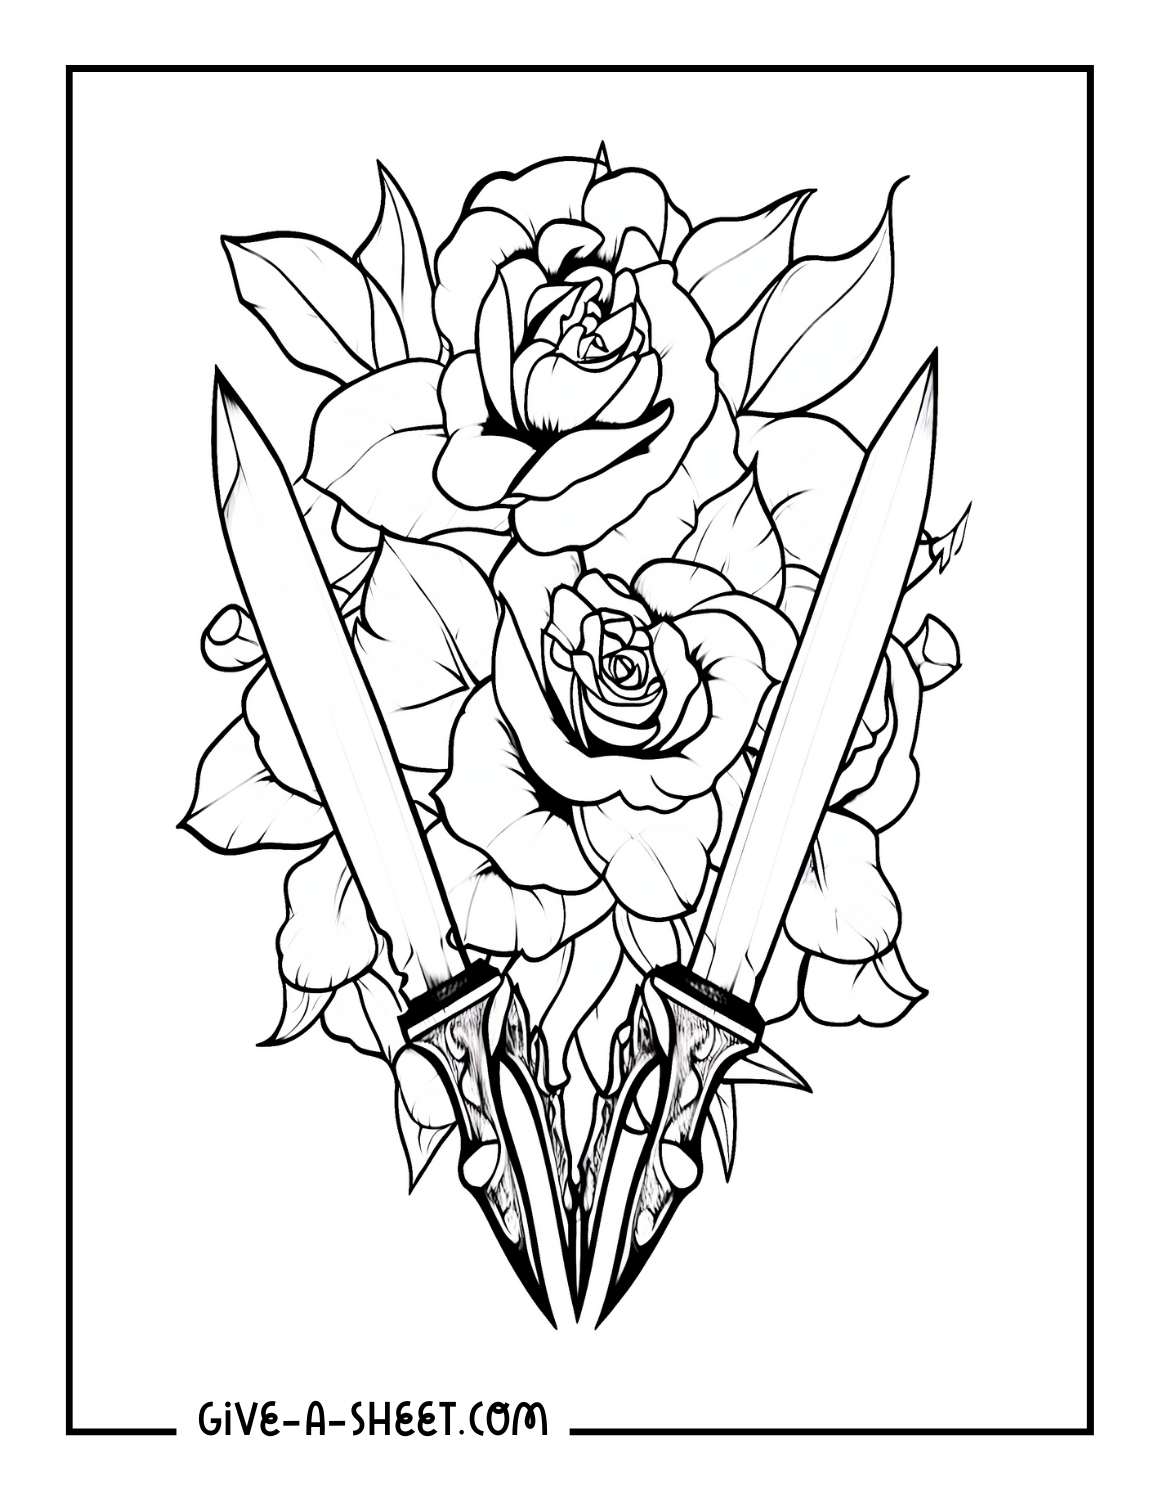 Roses with two swords tattoo coloring page.